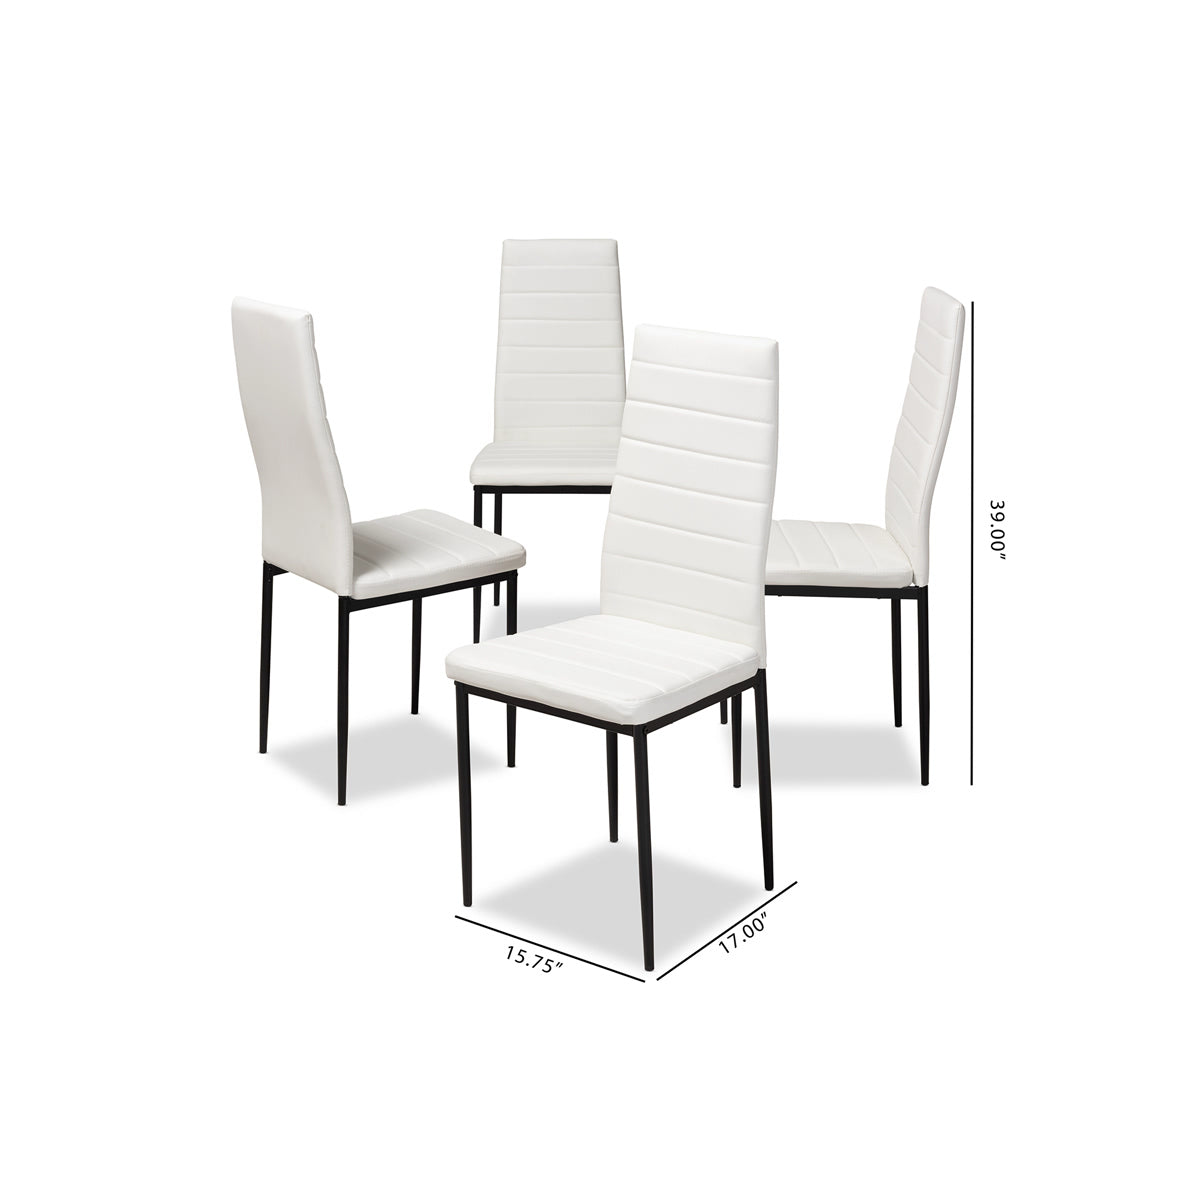 Baxton Studio Armand Modern and Contemporary White Faux Leather Upholstered Dining Chair (Set of 4) Baxton Studio-dining chair-Minimal And Modern - 5